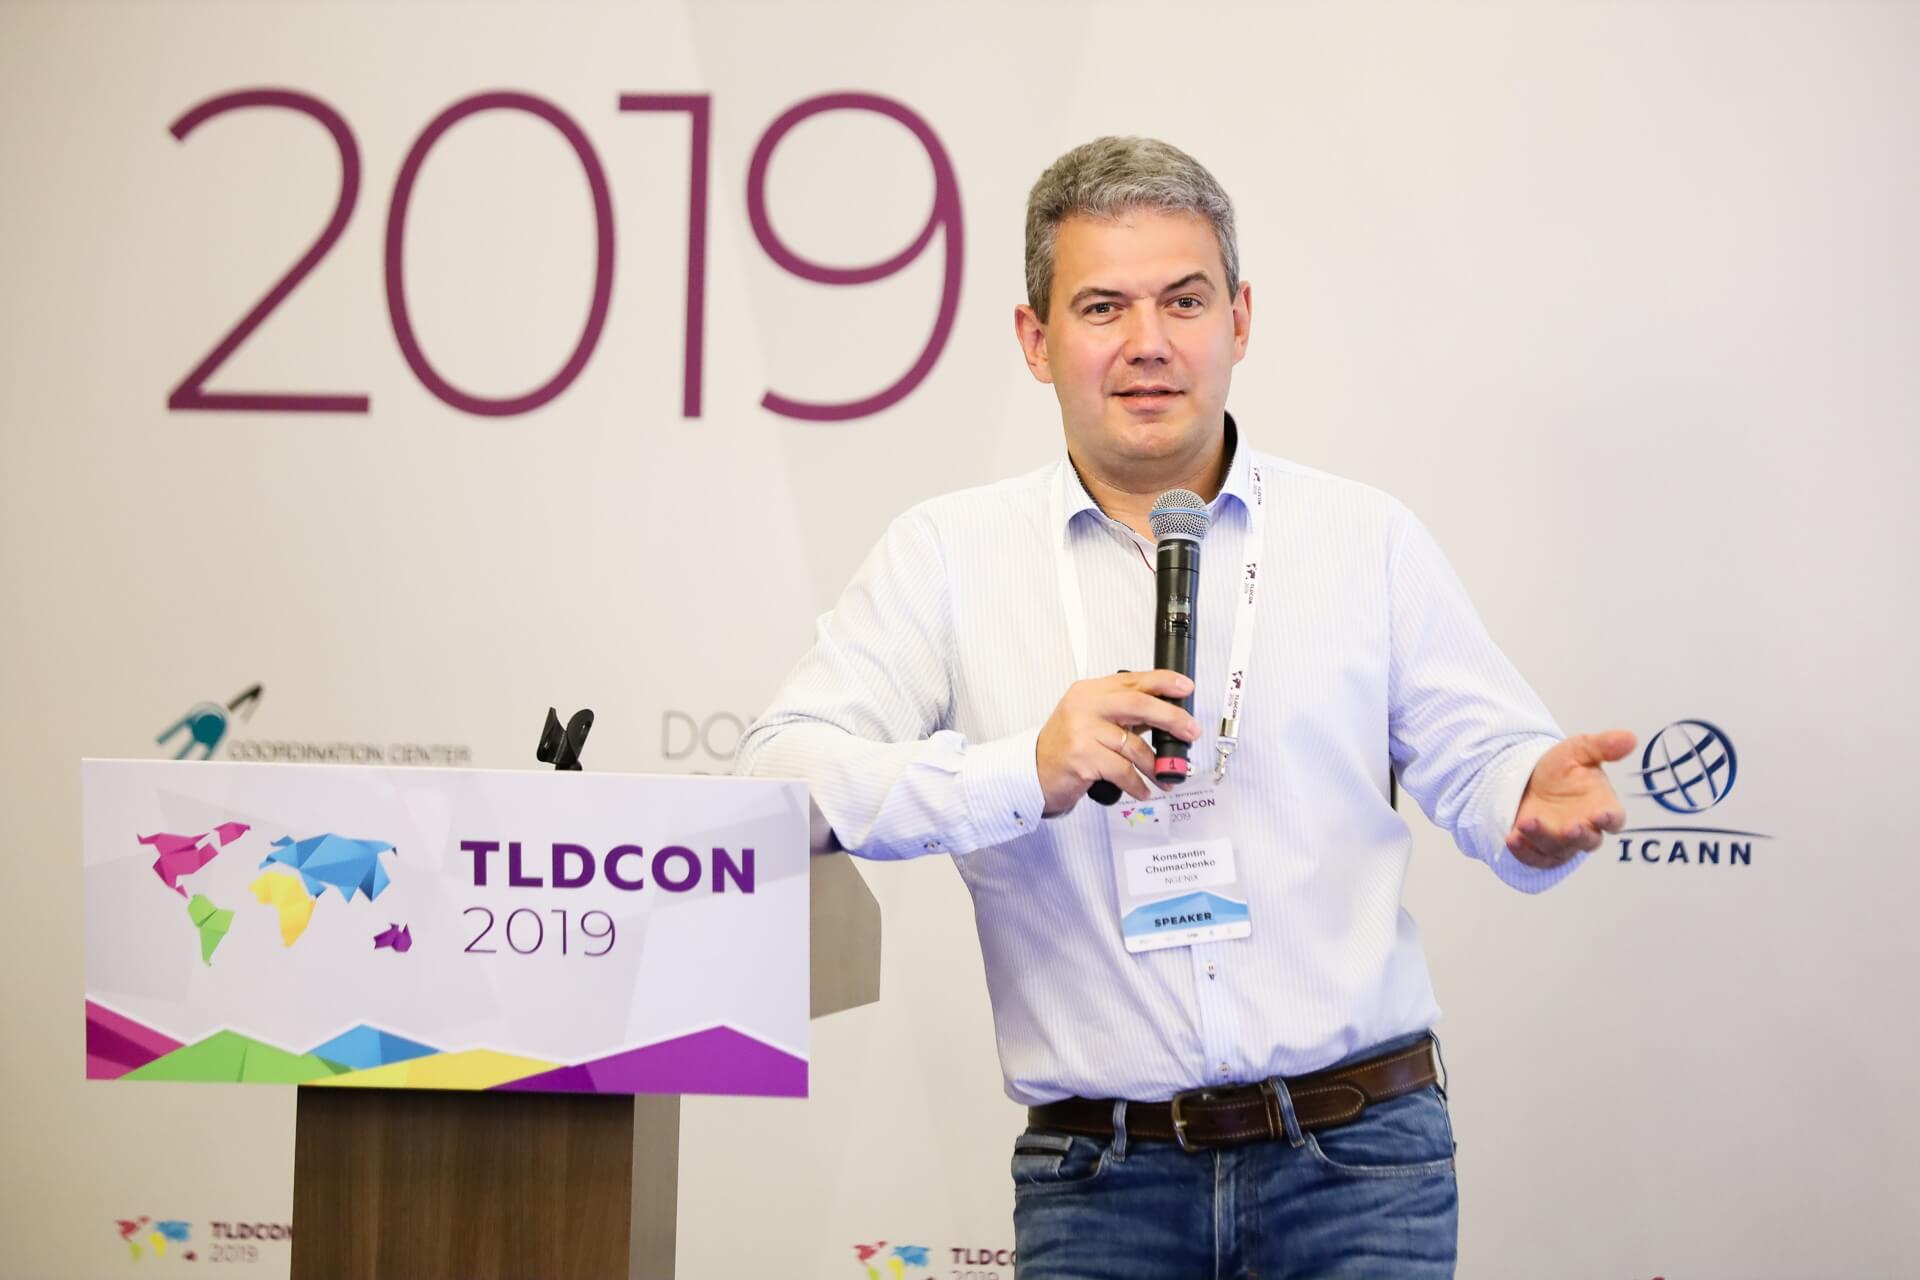 NGENIX at TLDCON 2019